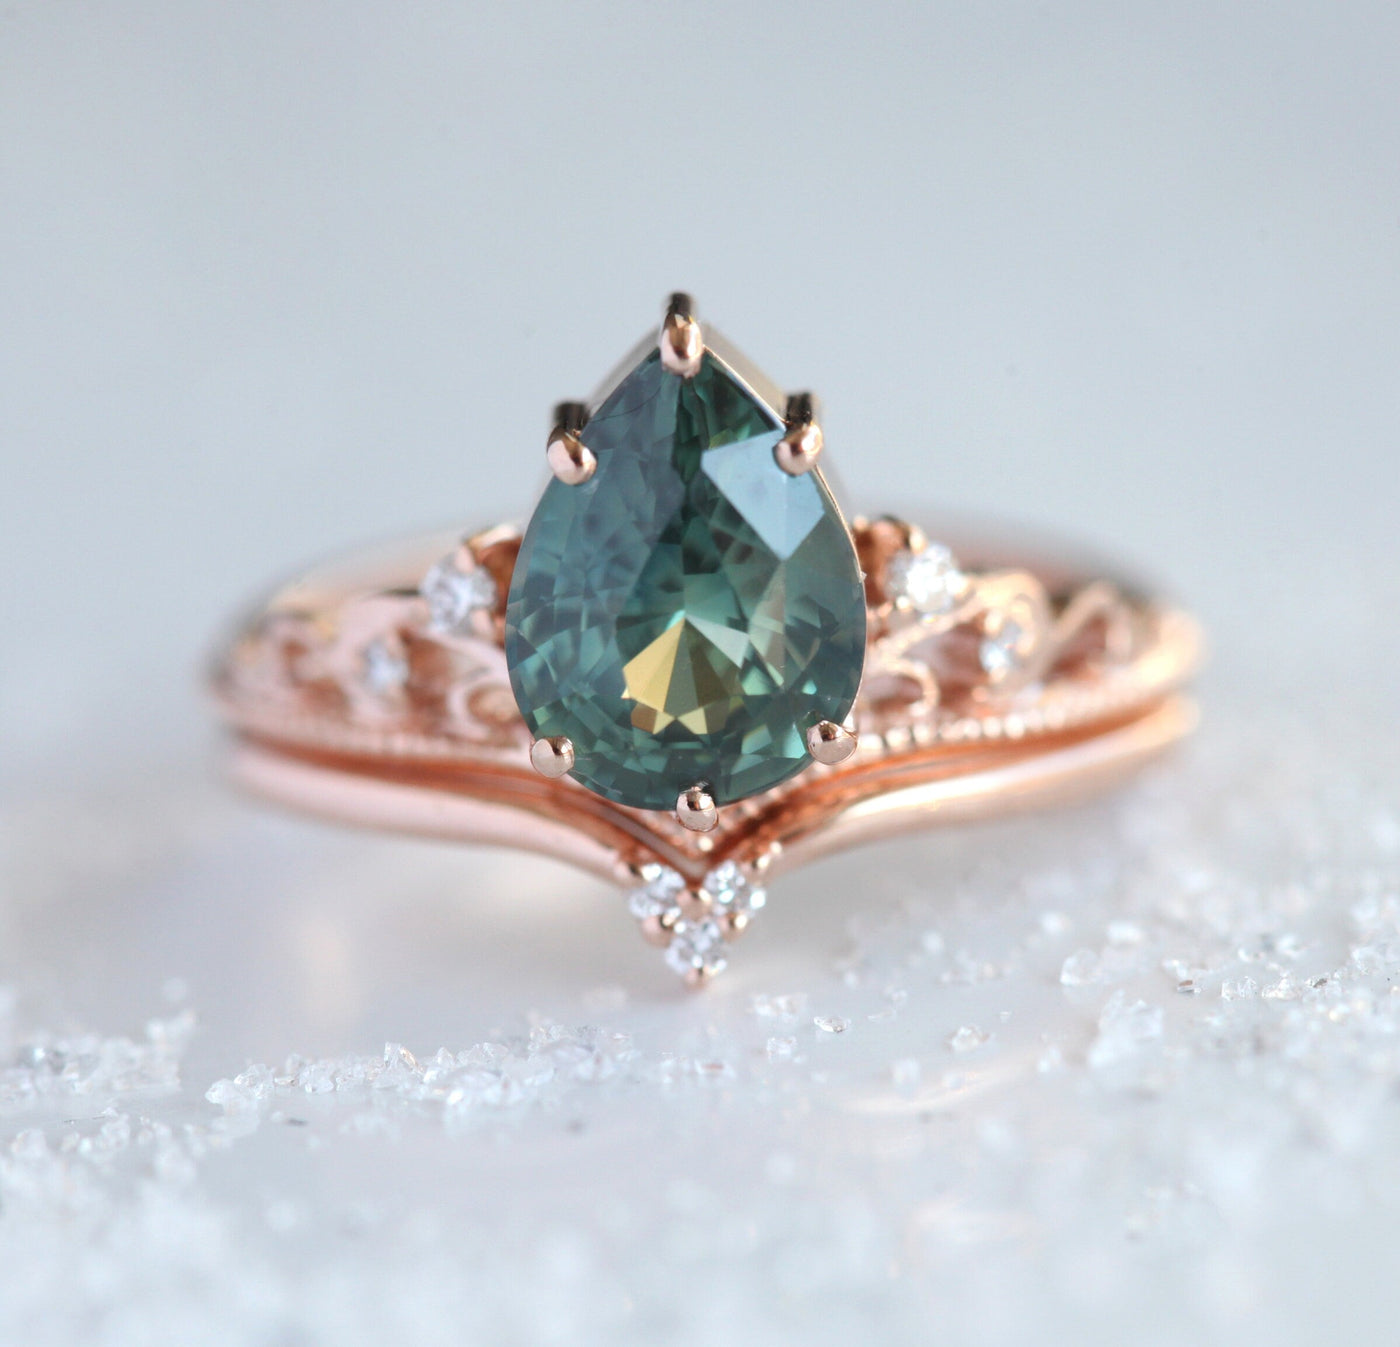 Vintage pear-shaped teal sapphire ring with white side diamonds